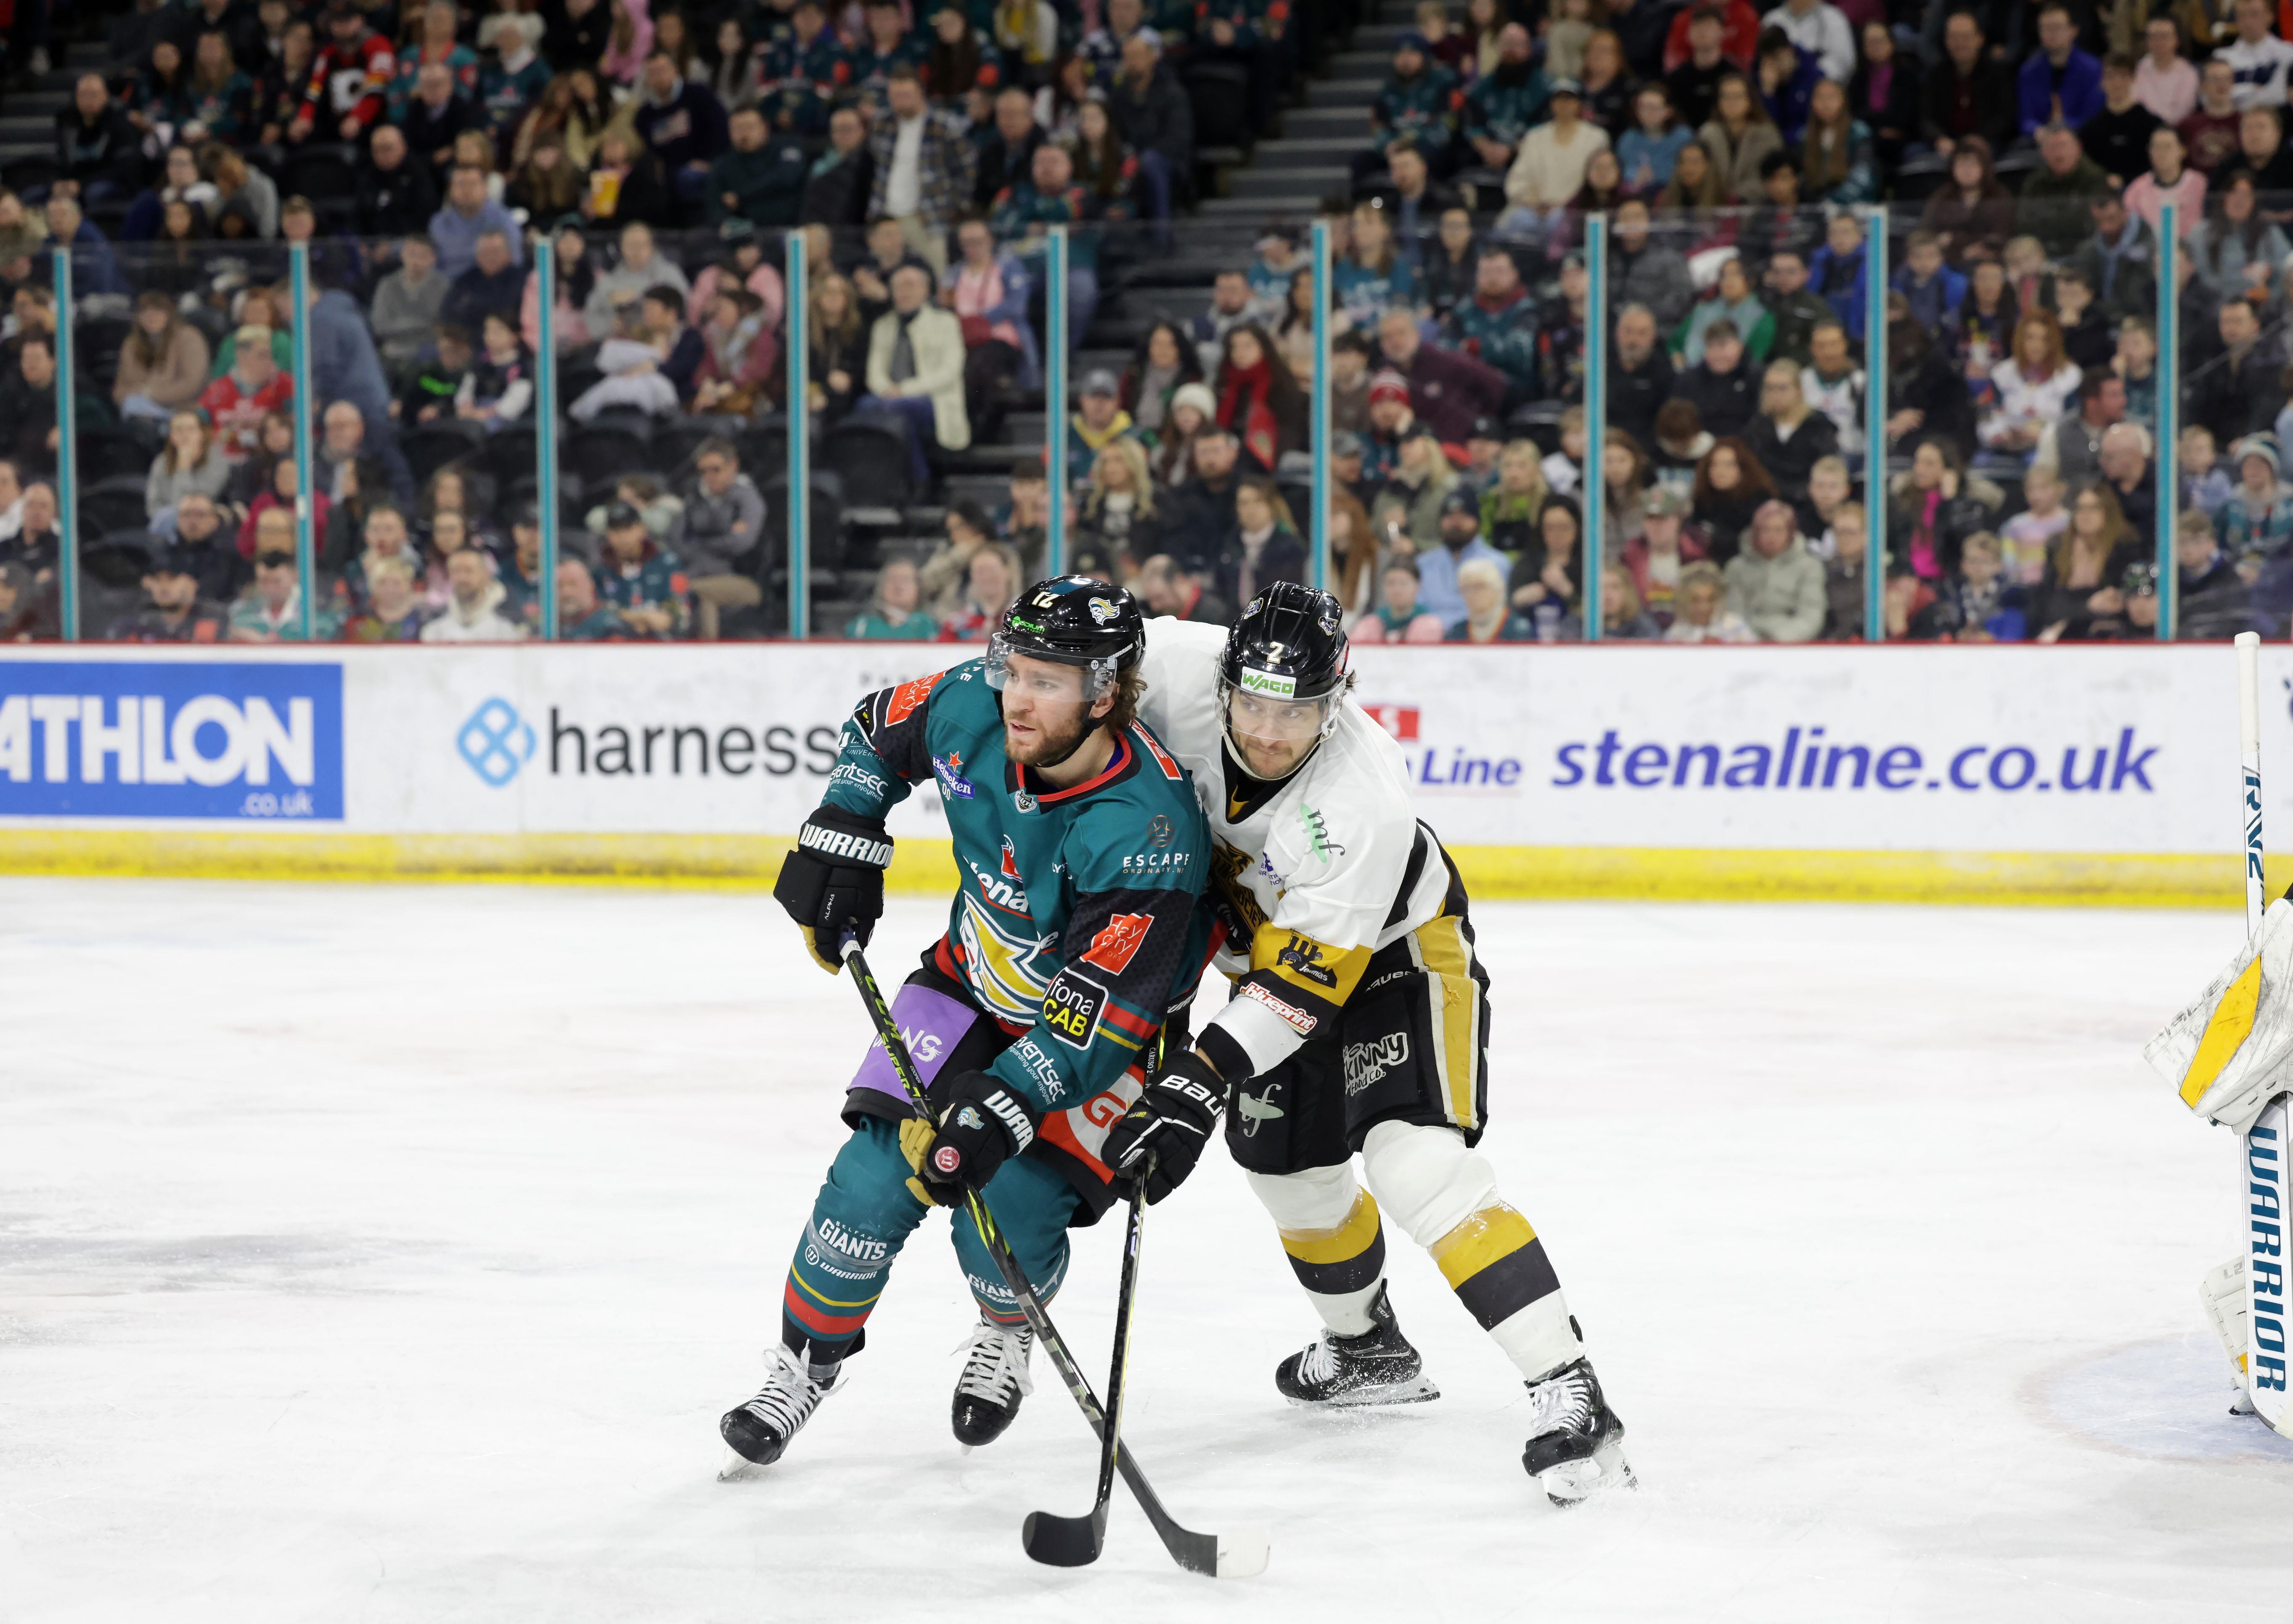 FINAL SCORE: GIANTS 6-1 PANTHERS Top Image